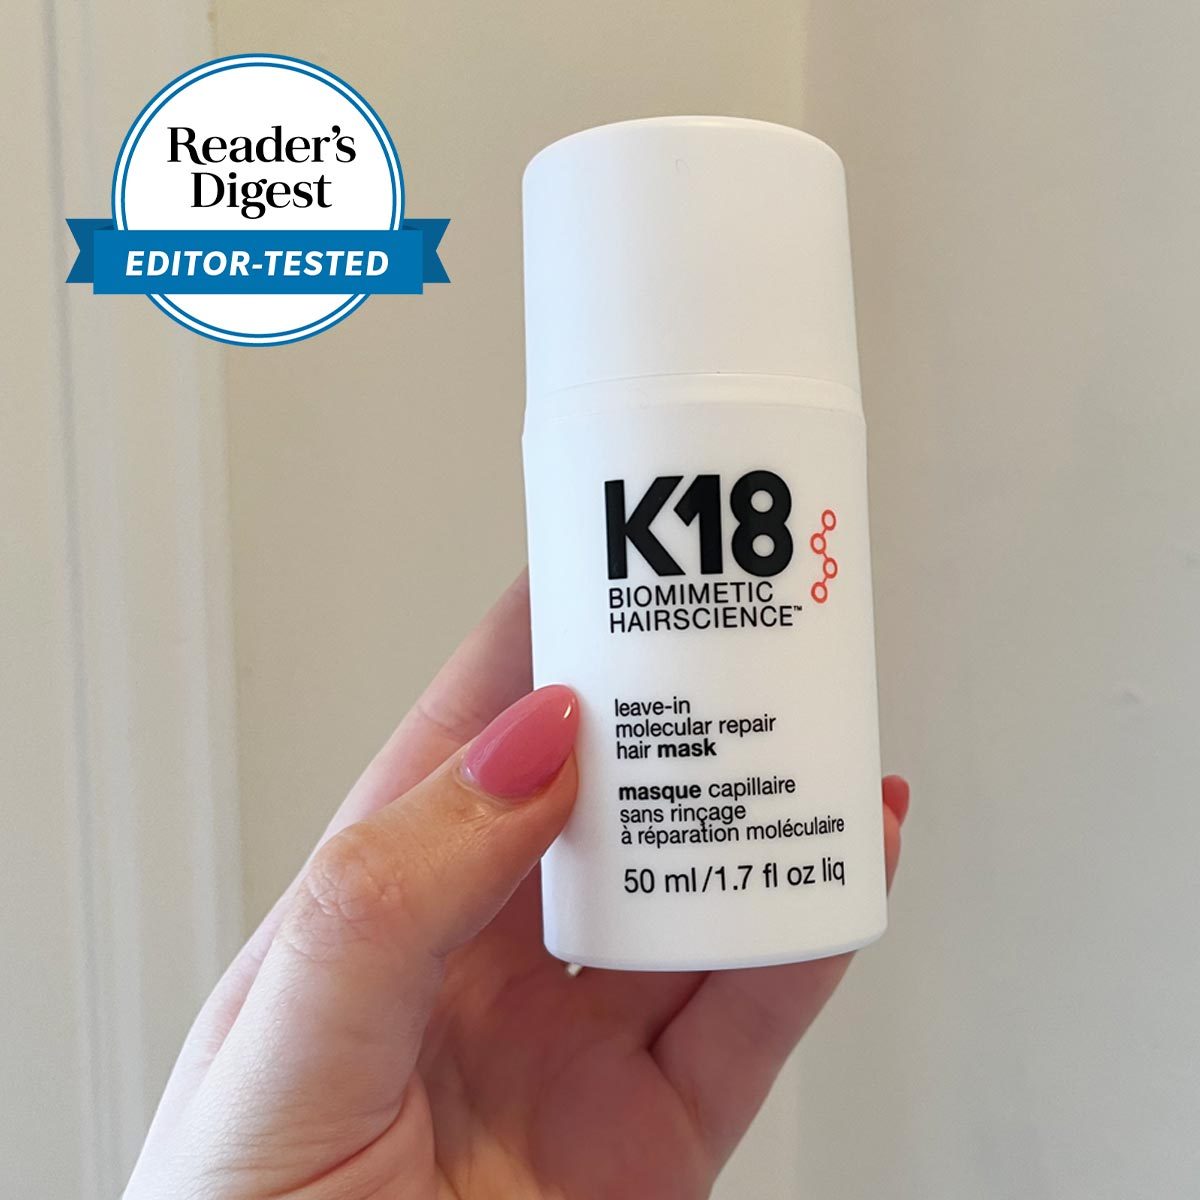 K18 Hair Mask Review: Is It Worth the Investment? | Trusted Since 1922